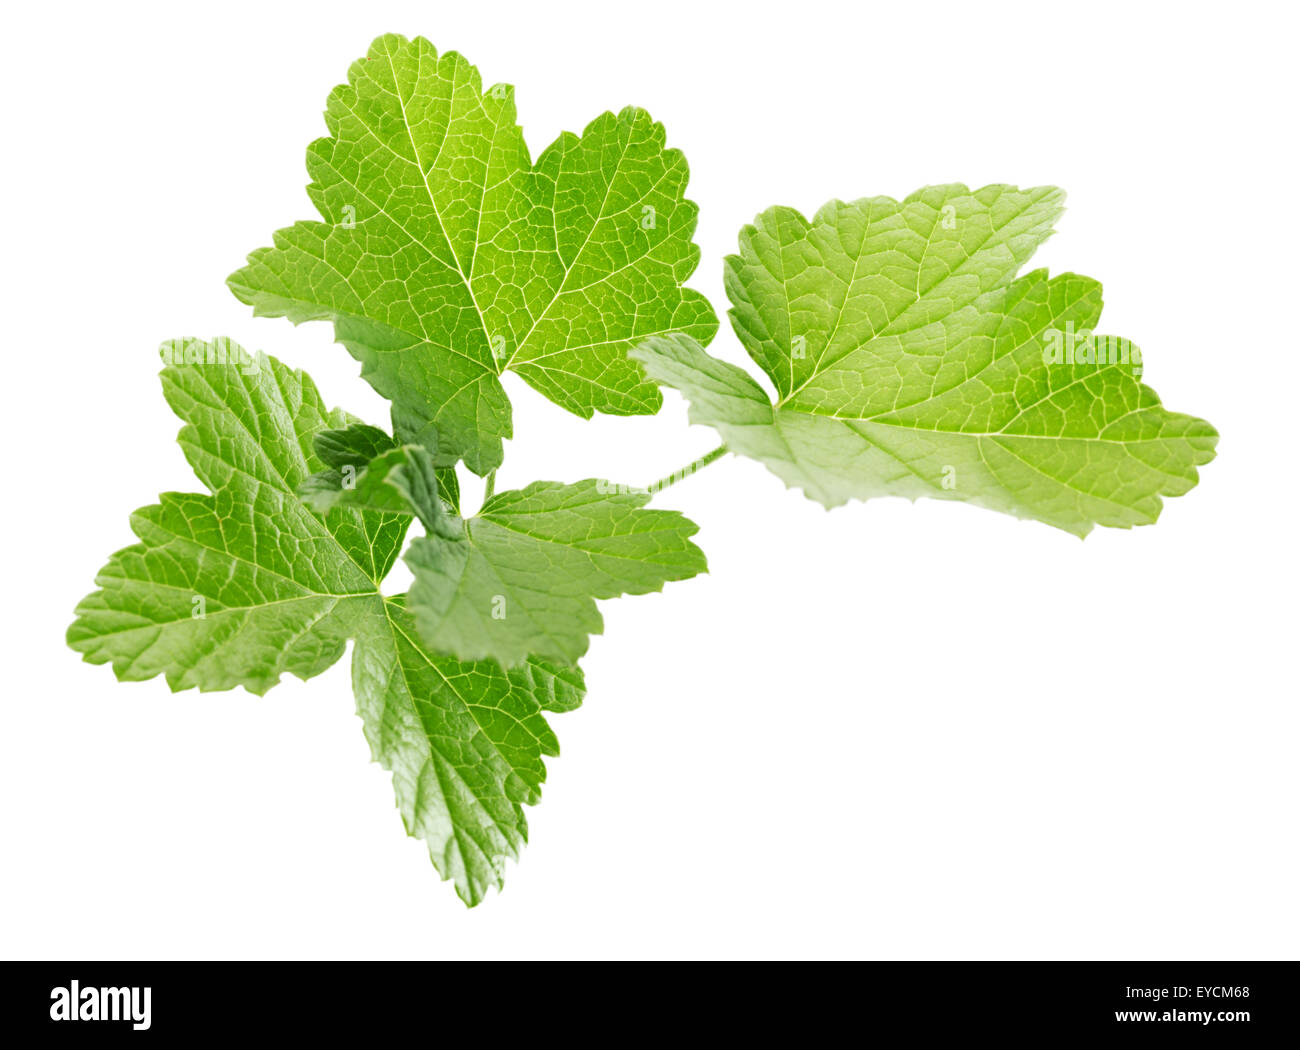 Currant leaves isolated on the white background. Stock Photo